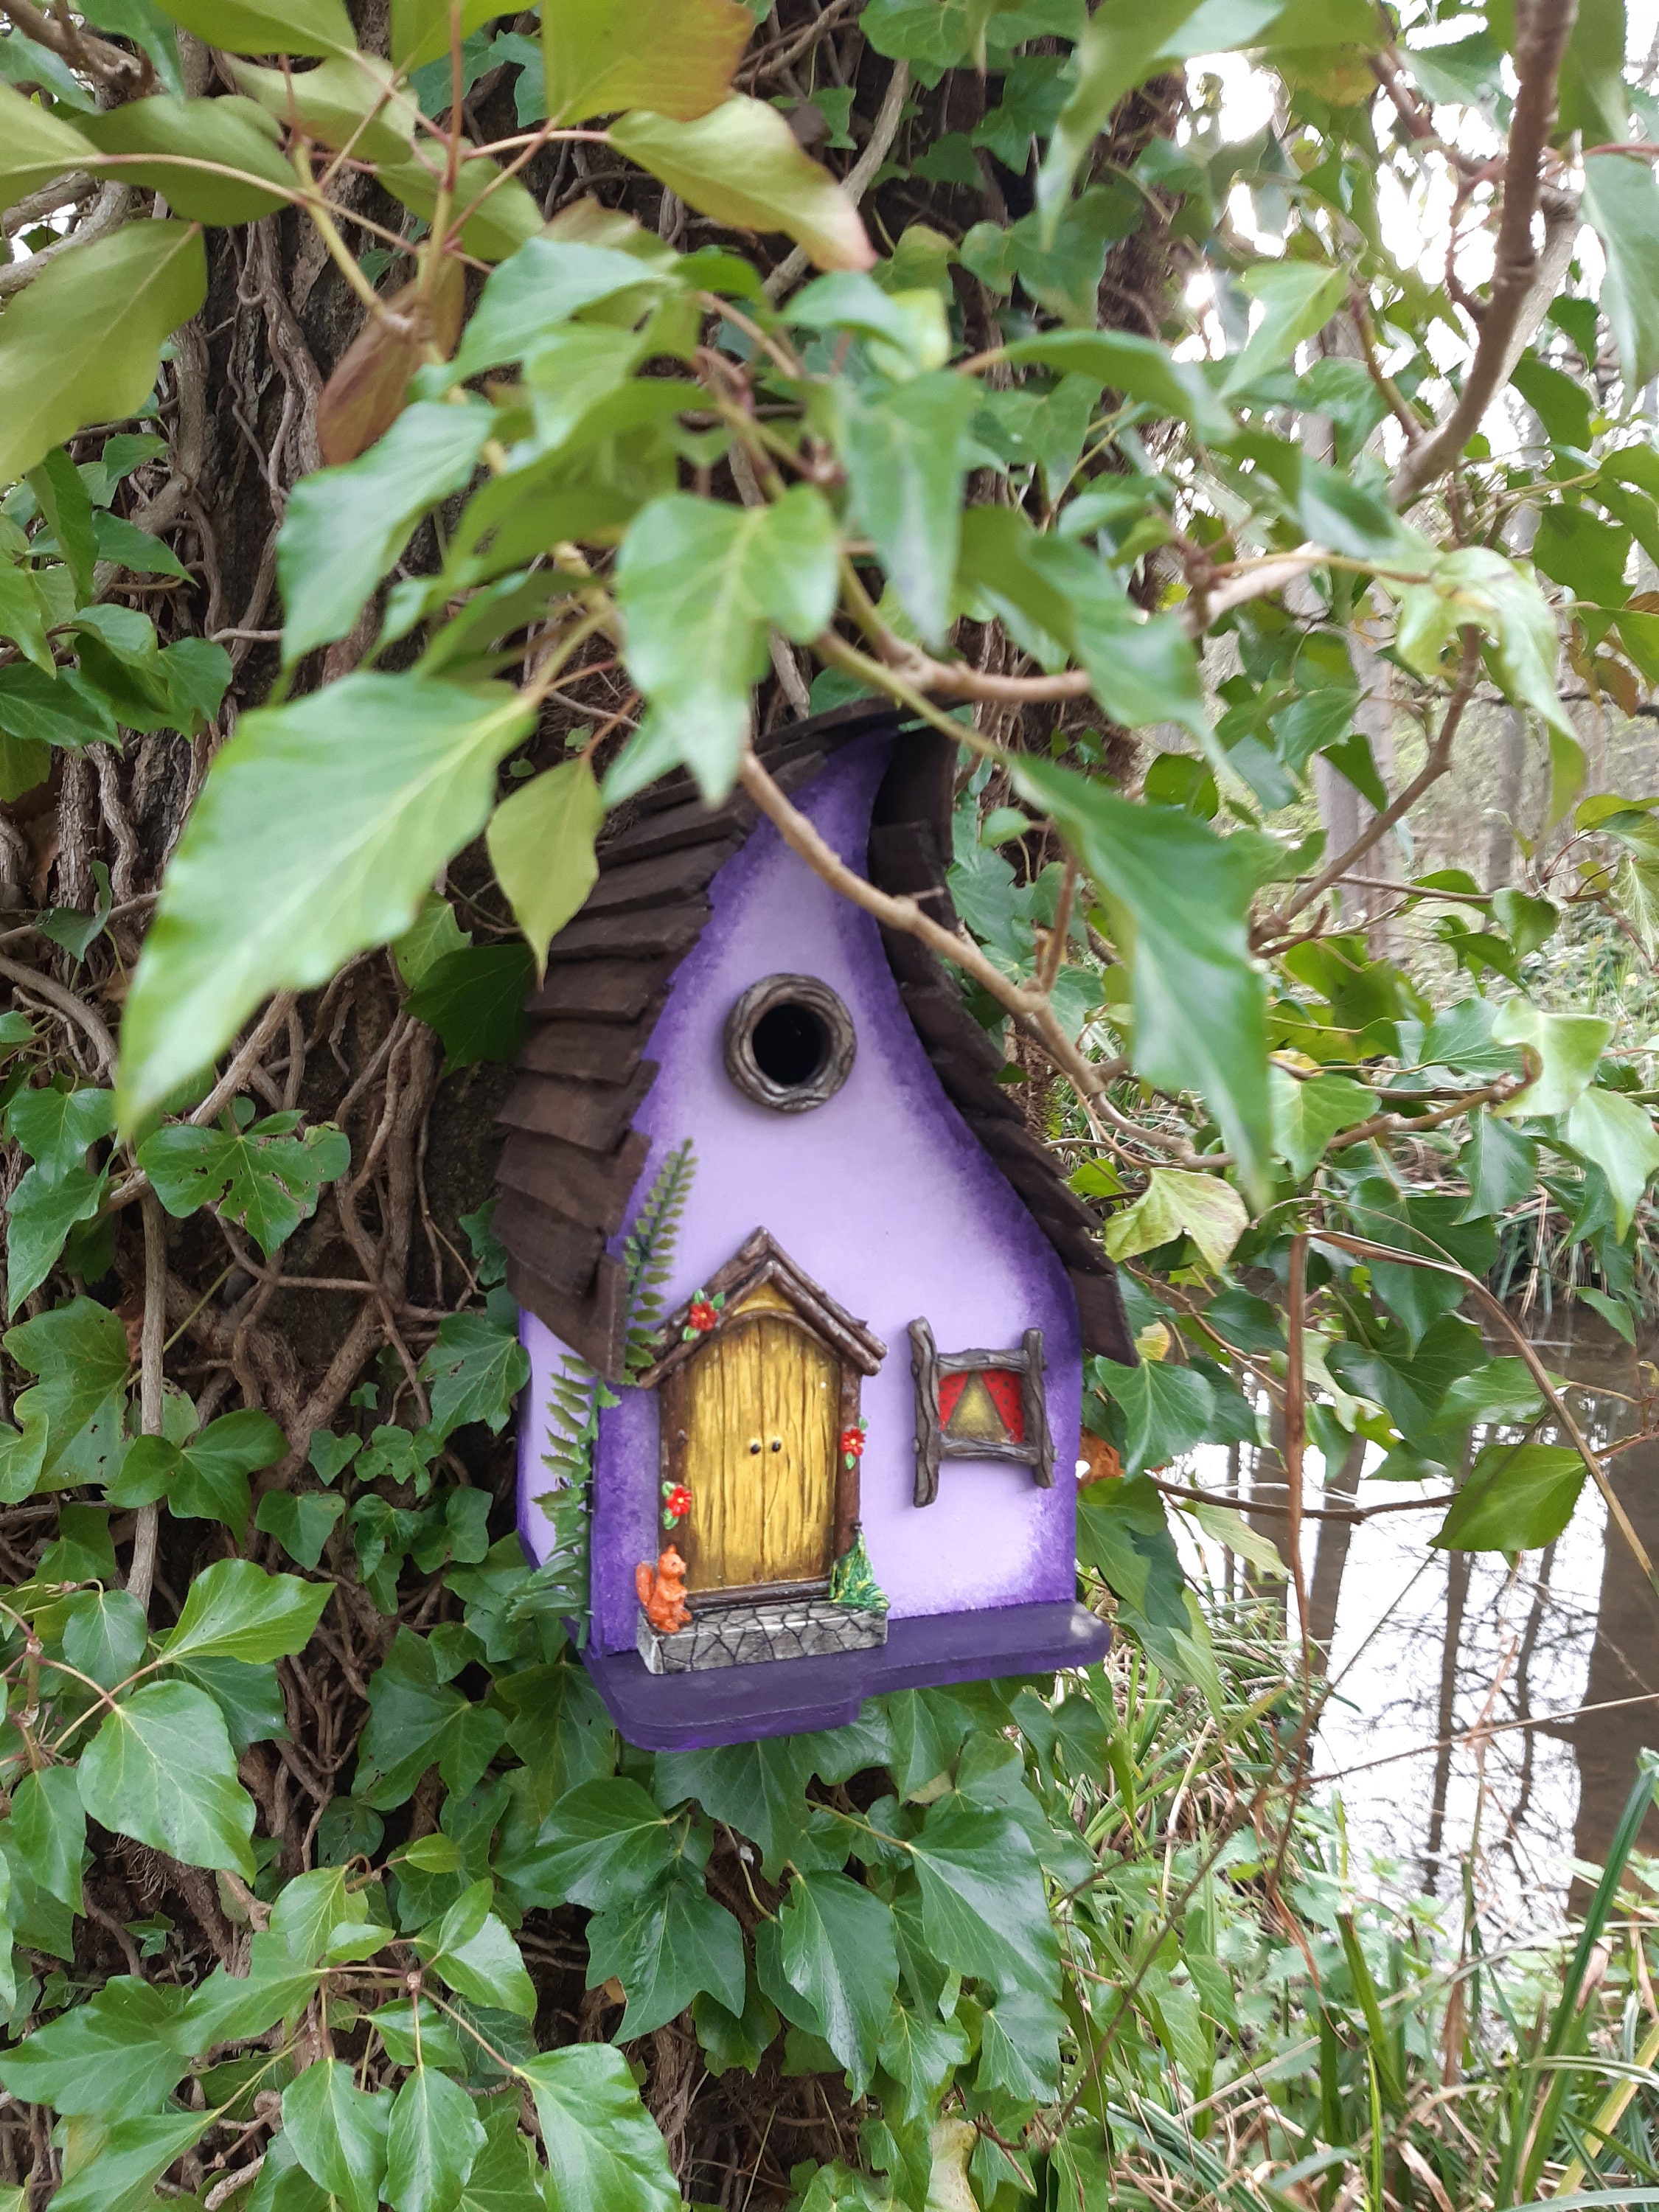 Fairy House Styled Bird House, Nesting Box, Hand Painted Gifts for Garden  Lovers, Green Bird Box, Birthday Gifts, Outdoor Garden Decoration 